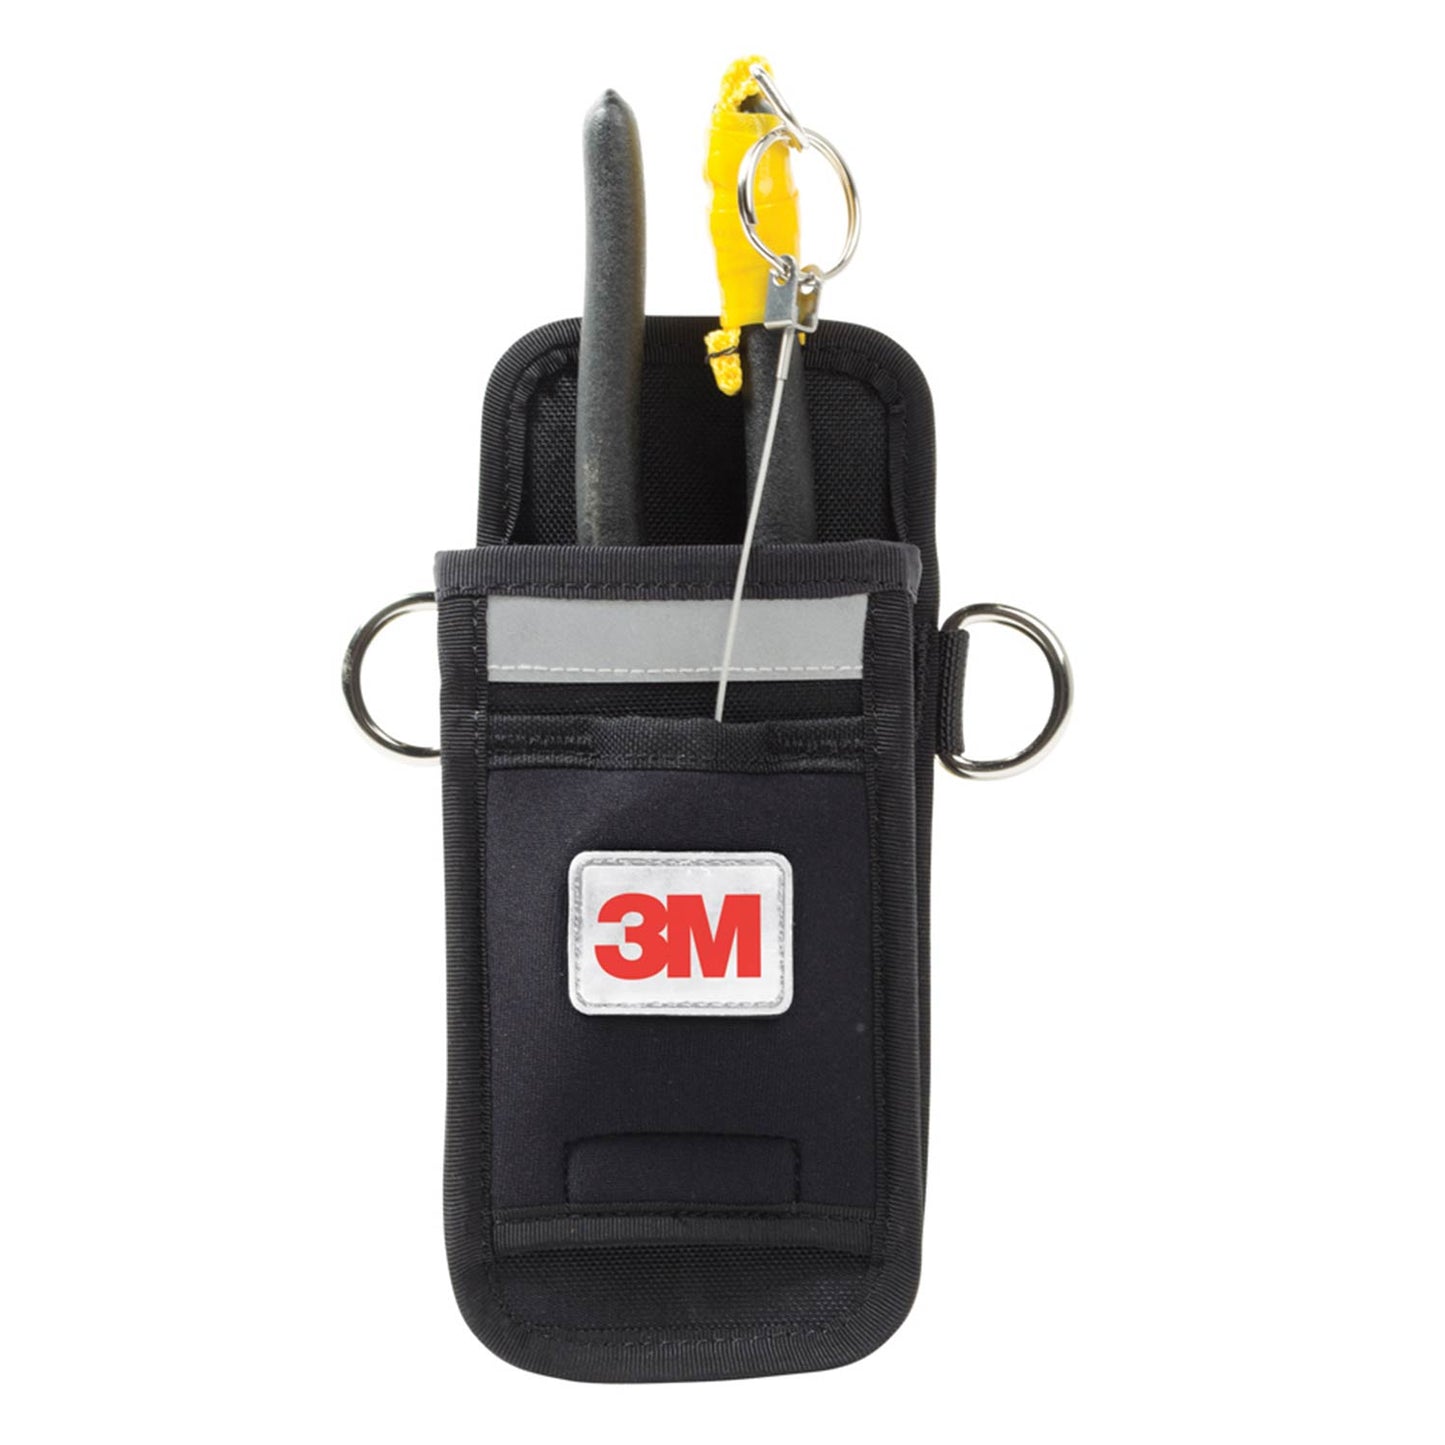 3M DBI-SALA Retractable Single Tool Tether for Harness | 1500104